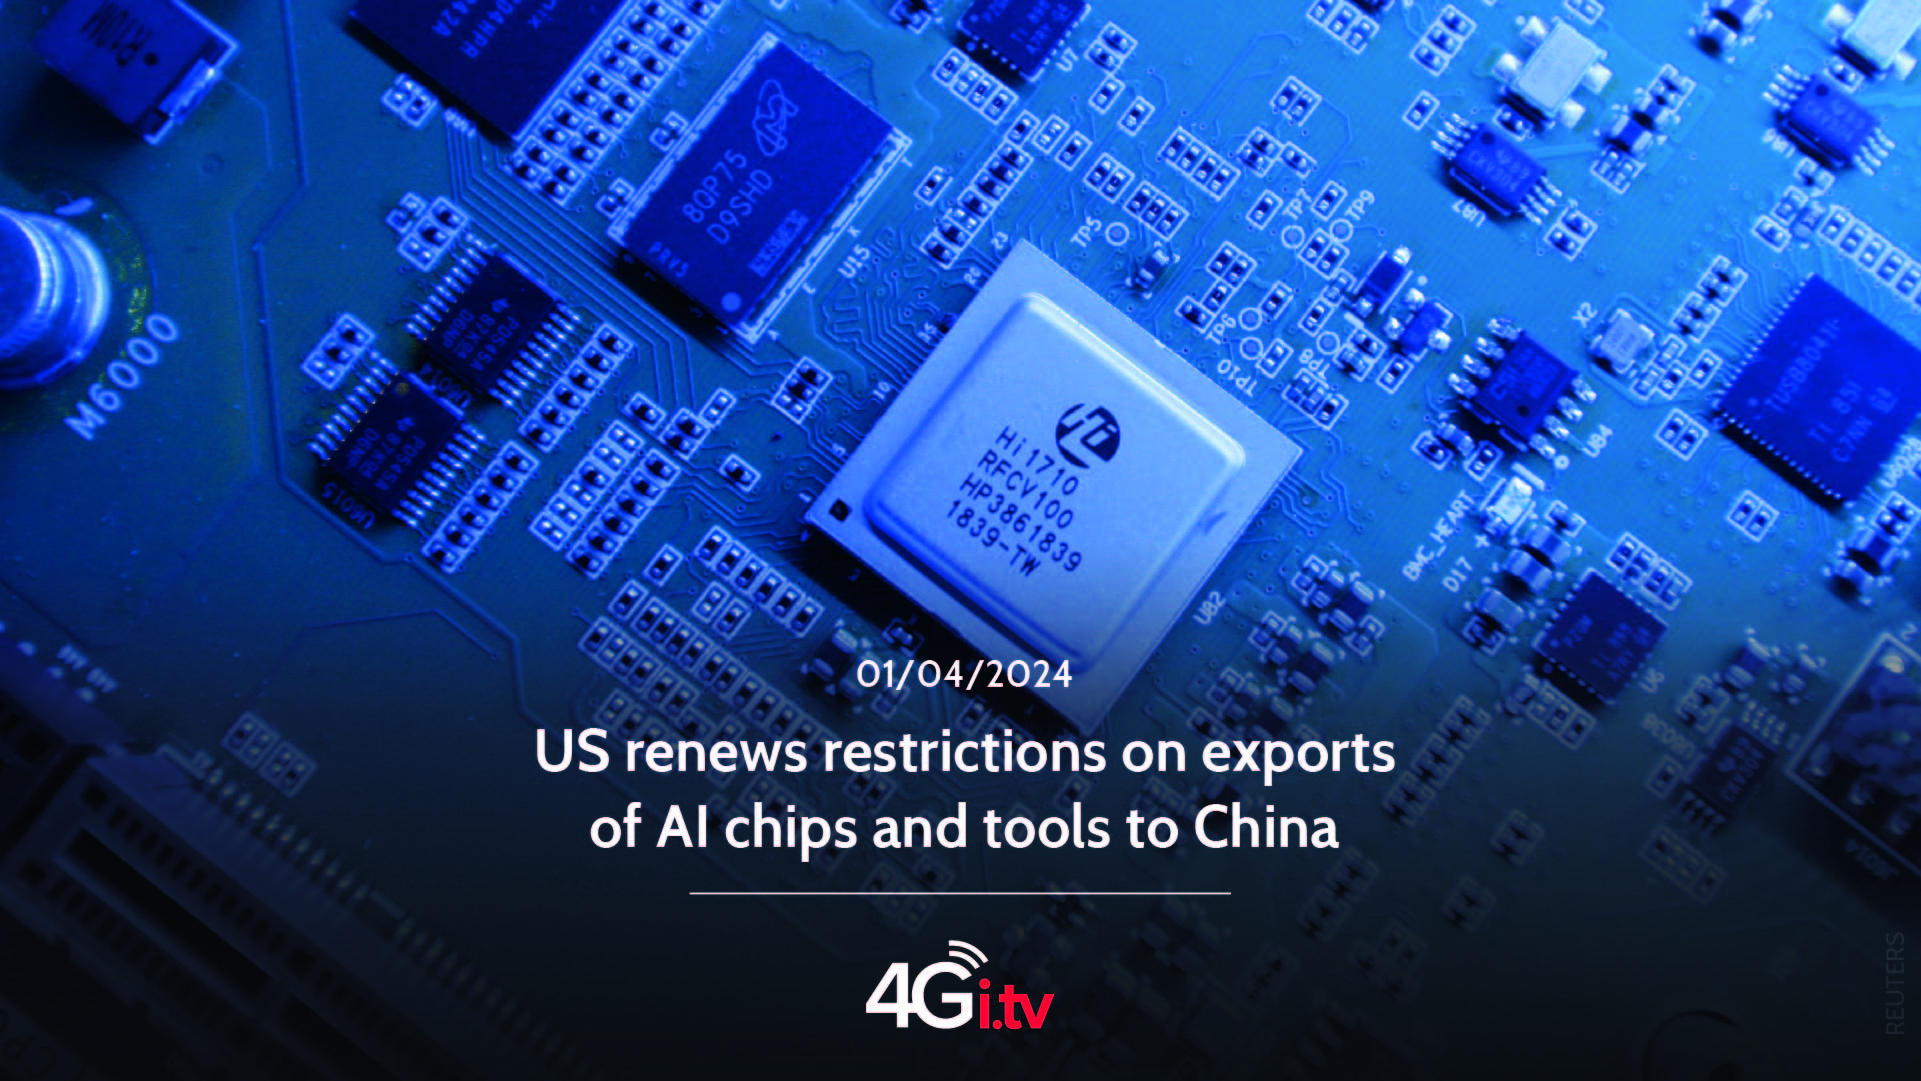 Lesen Sie mehr über den Artikel US renews restrictions on exports of AI chips and tools to China